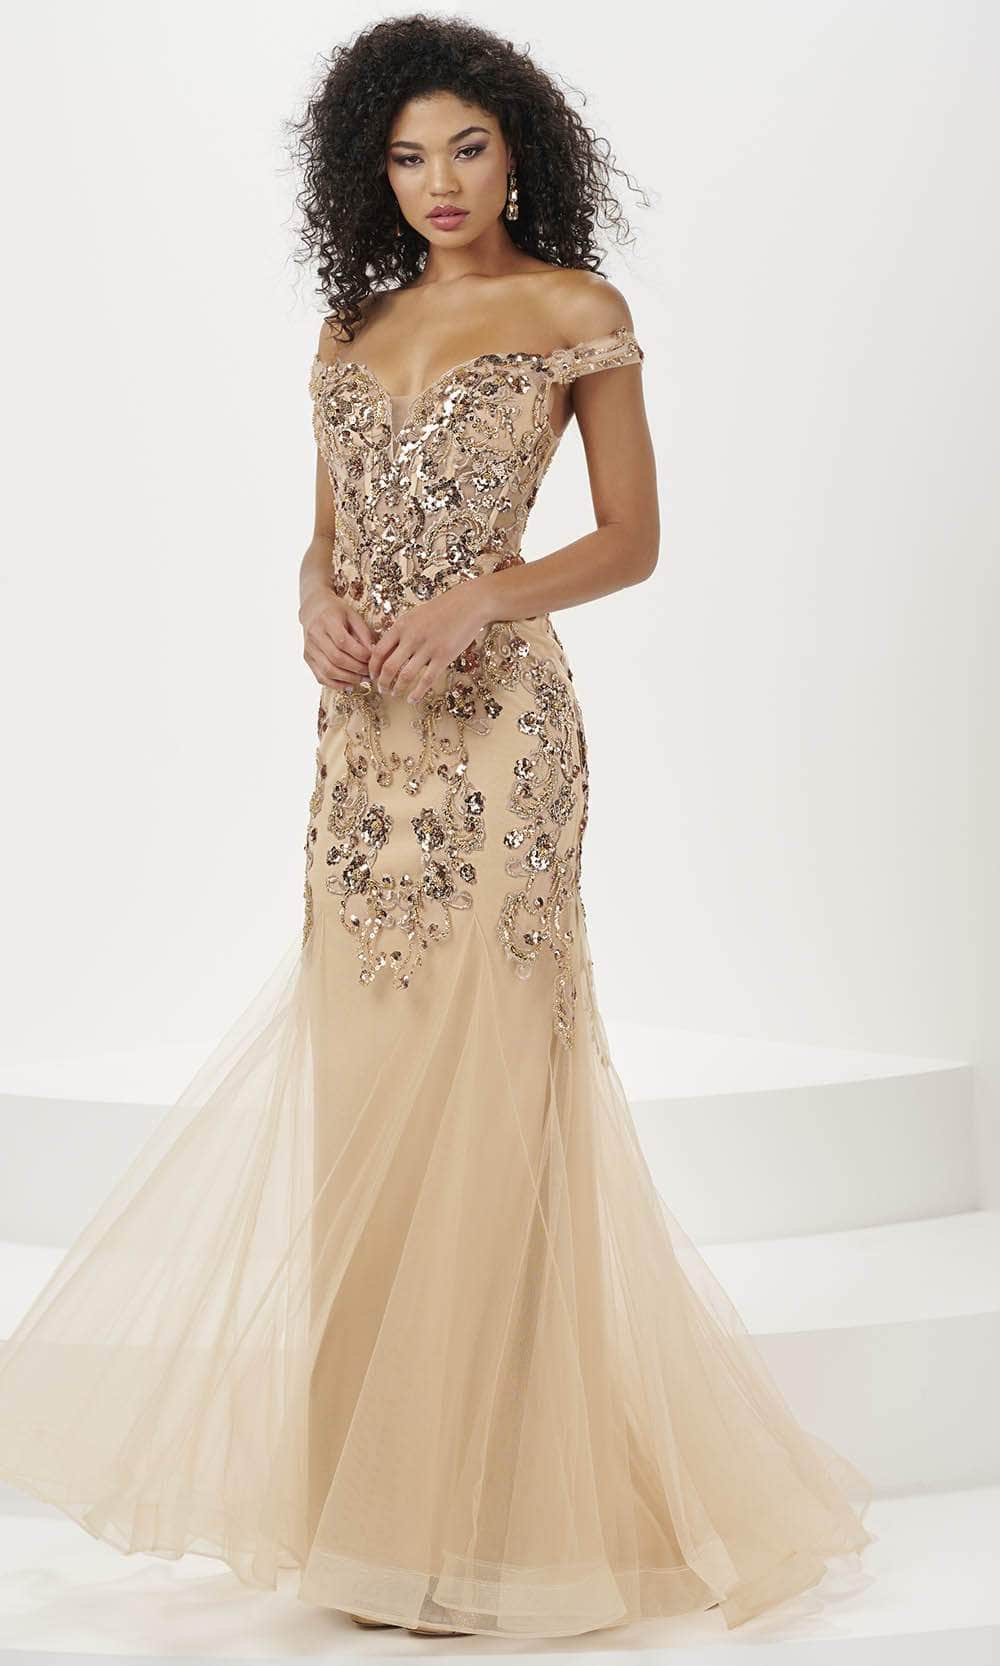 Image of Panoply 14185 - Sequin Tulle Evening Gown